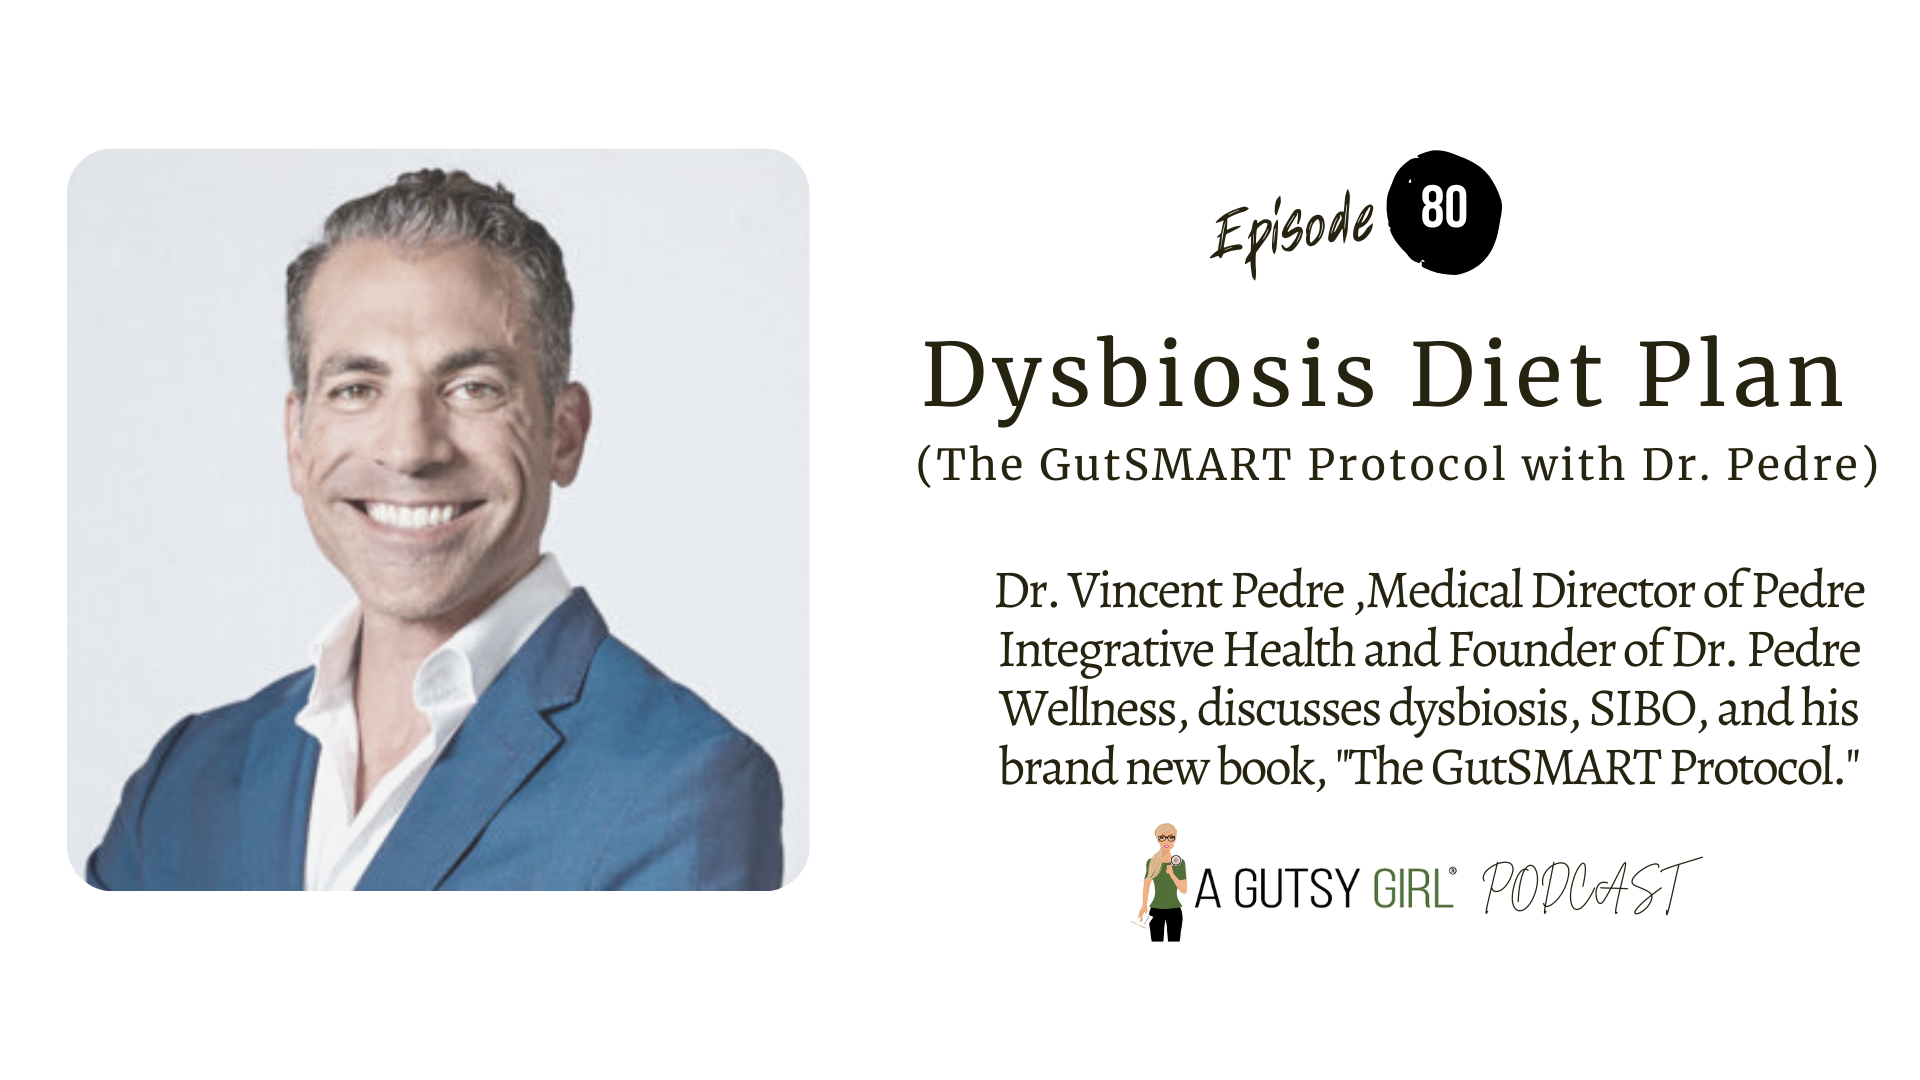 Dysbiosis Diet Plan (The GutSMART Protocol with Dr. Pedre)